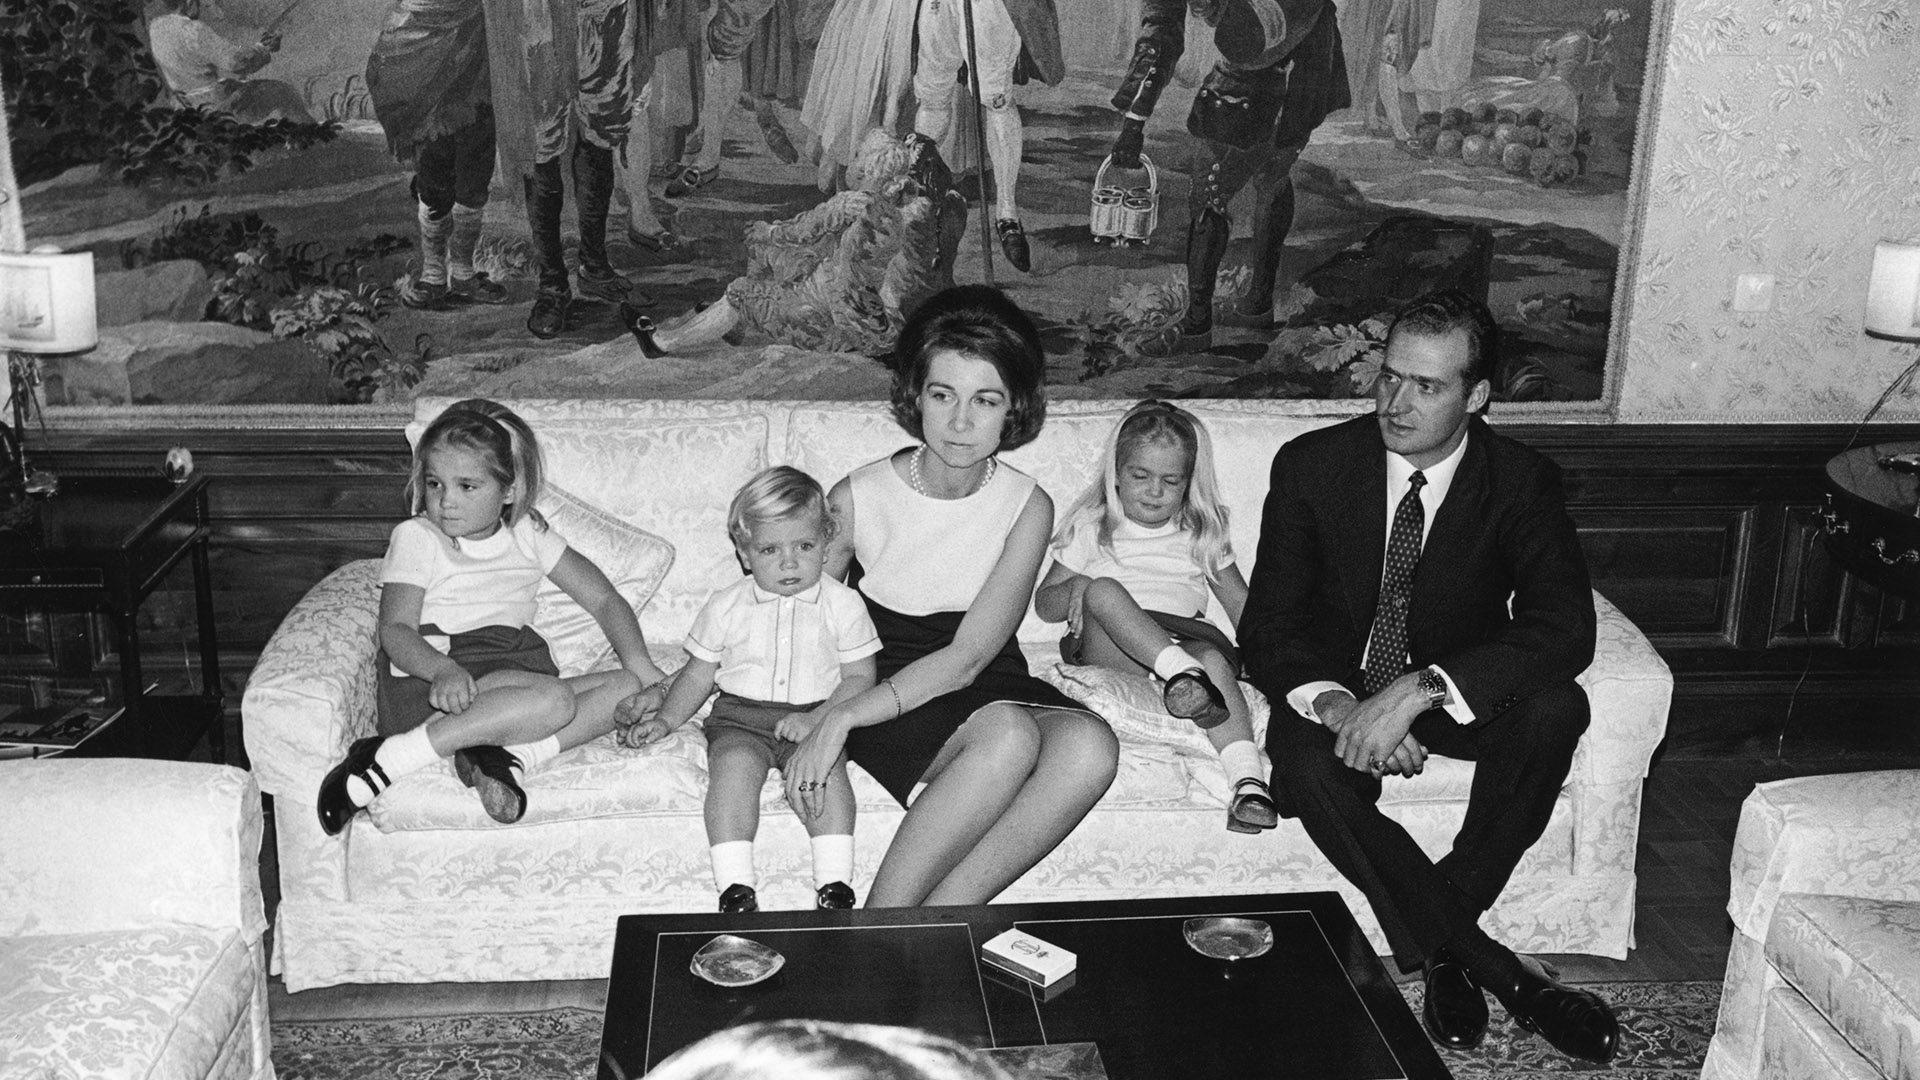 Prince Juan Carlos, future King of Spain at home in the Palace of Zarzuela, near Madrid, with his wife Princess Sophia and their children (left to right) Princess Elena, Prince Felipe and Princess Cristina, December 1969. (Photo by Express/Hulton Archive/Getty Images)